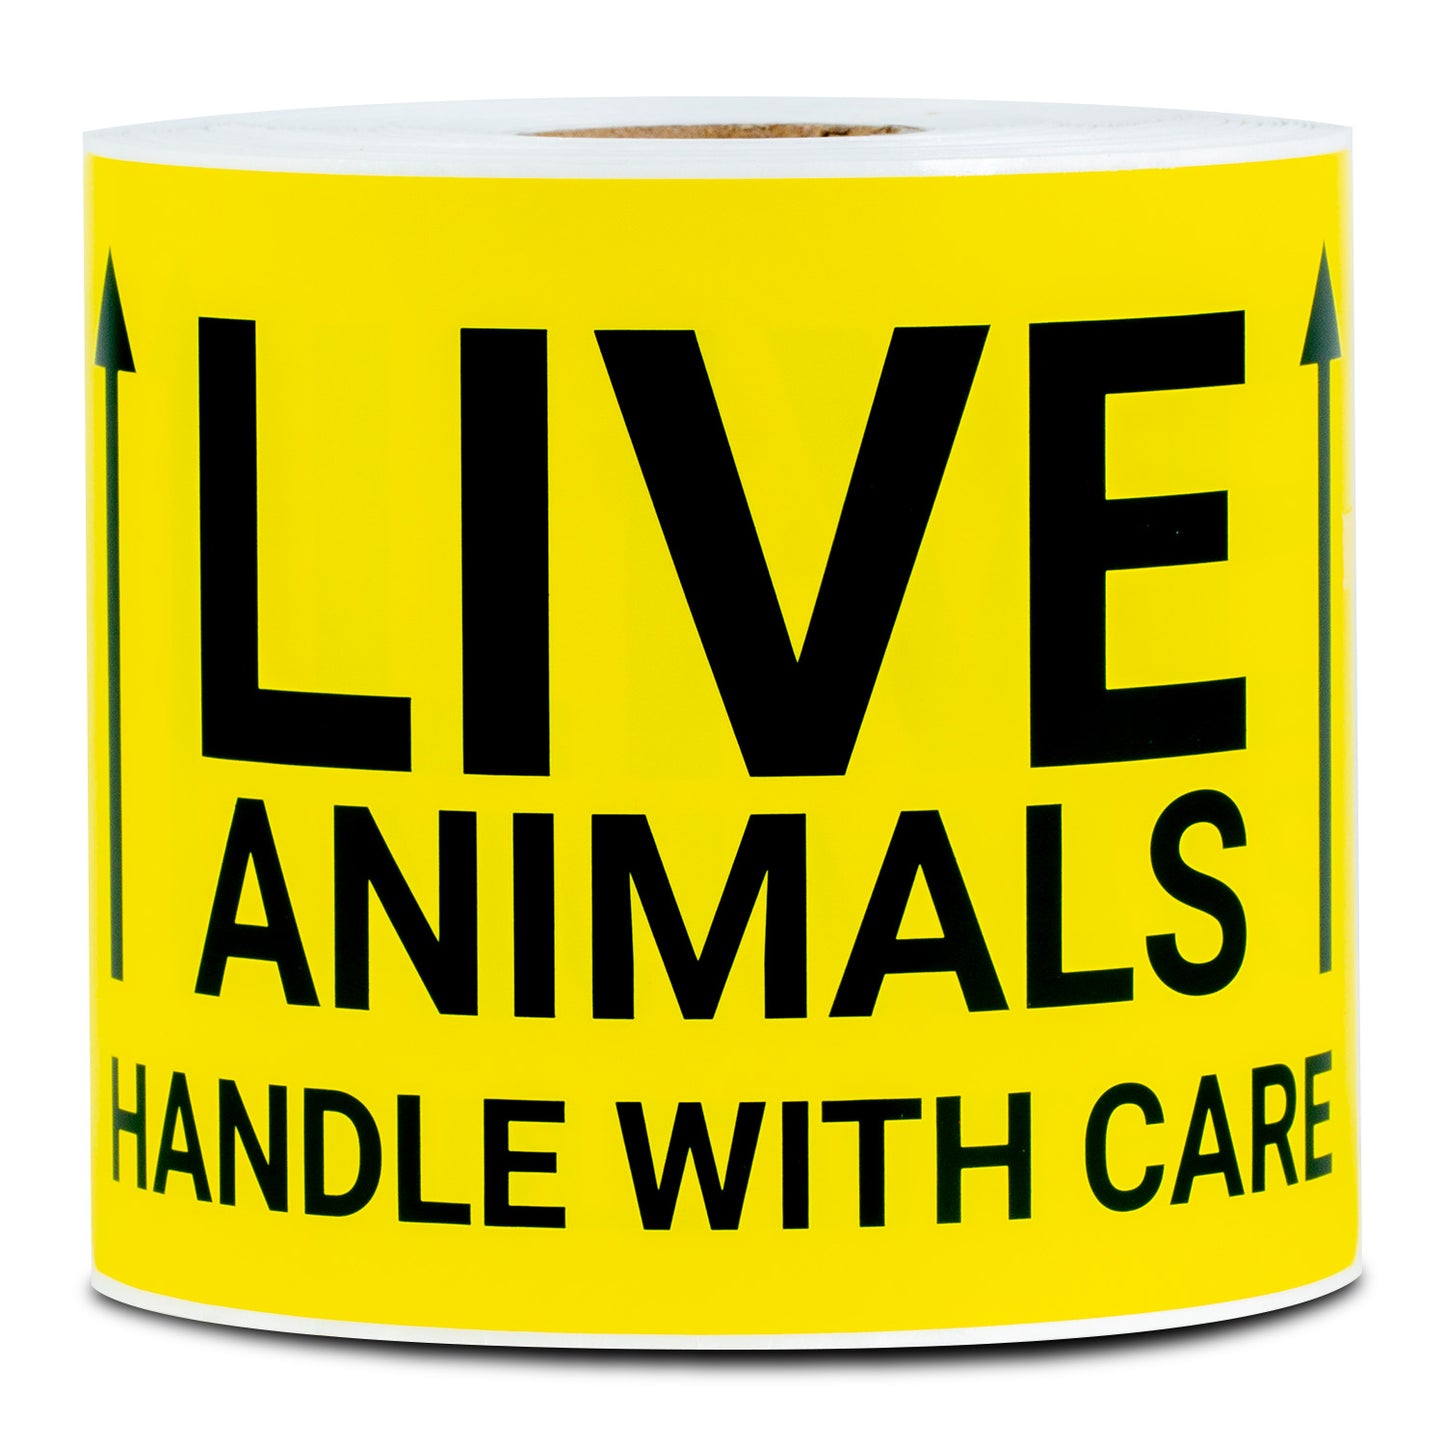 5 x 3 inch | Shipping & Handling: Handle with Care, Live Animals Stickers